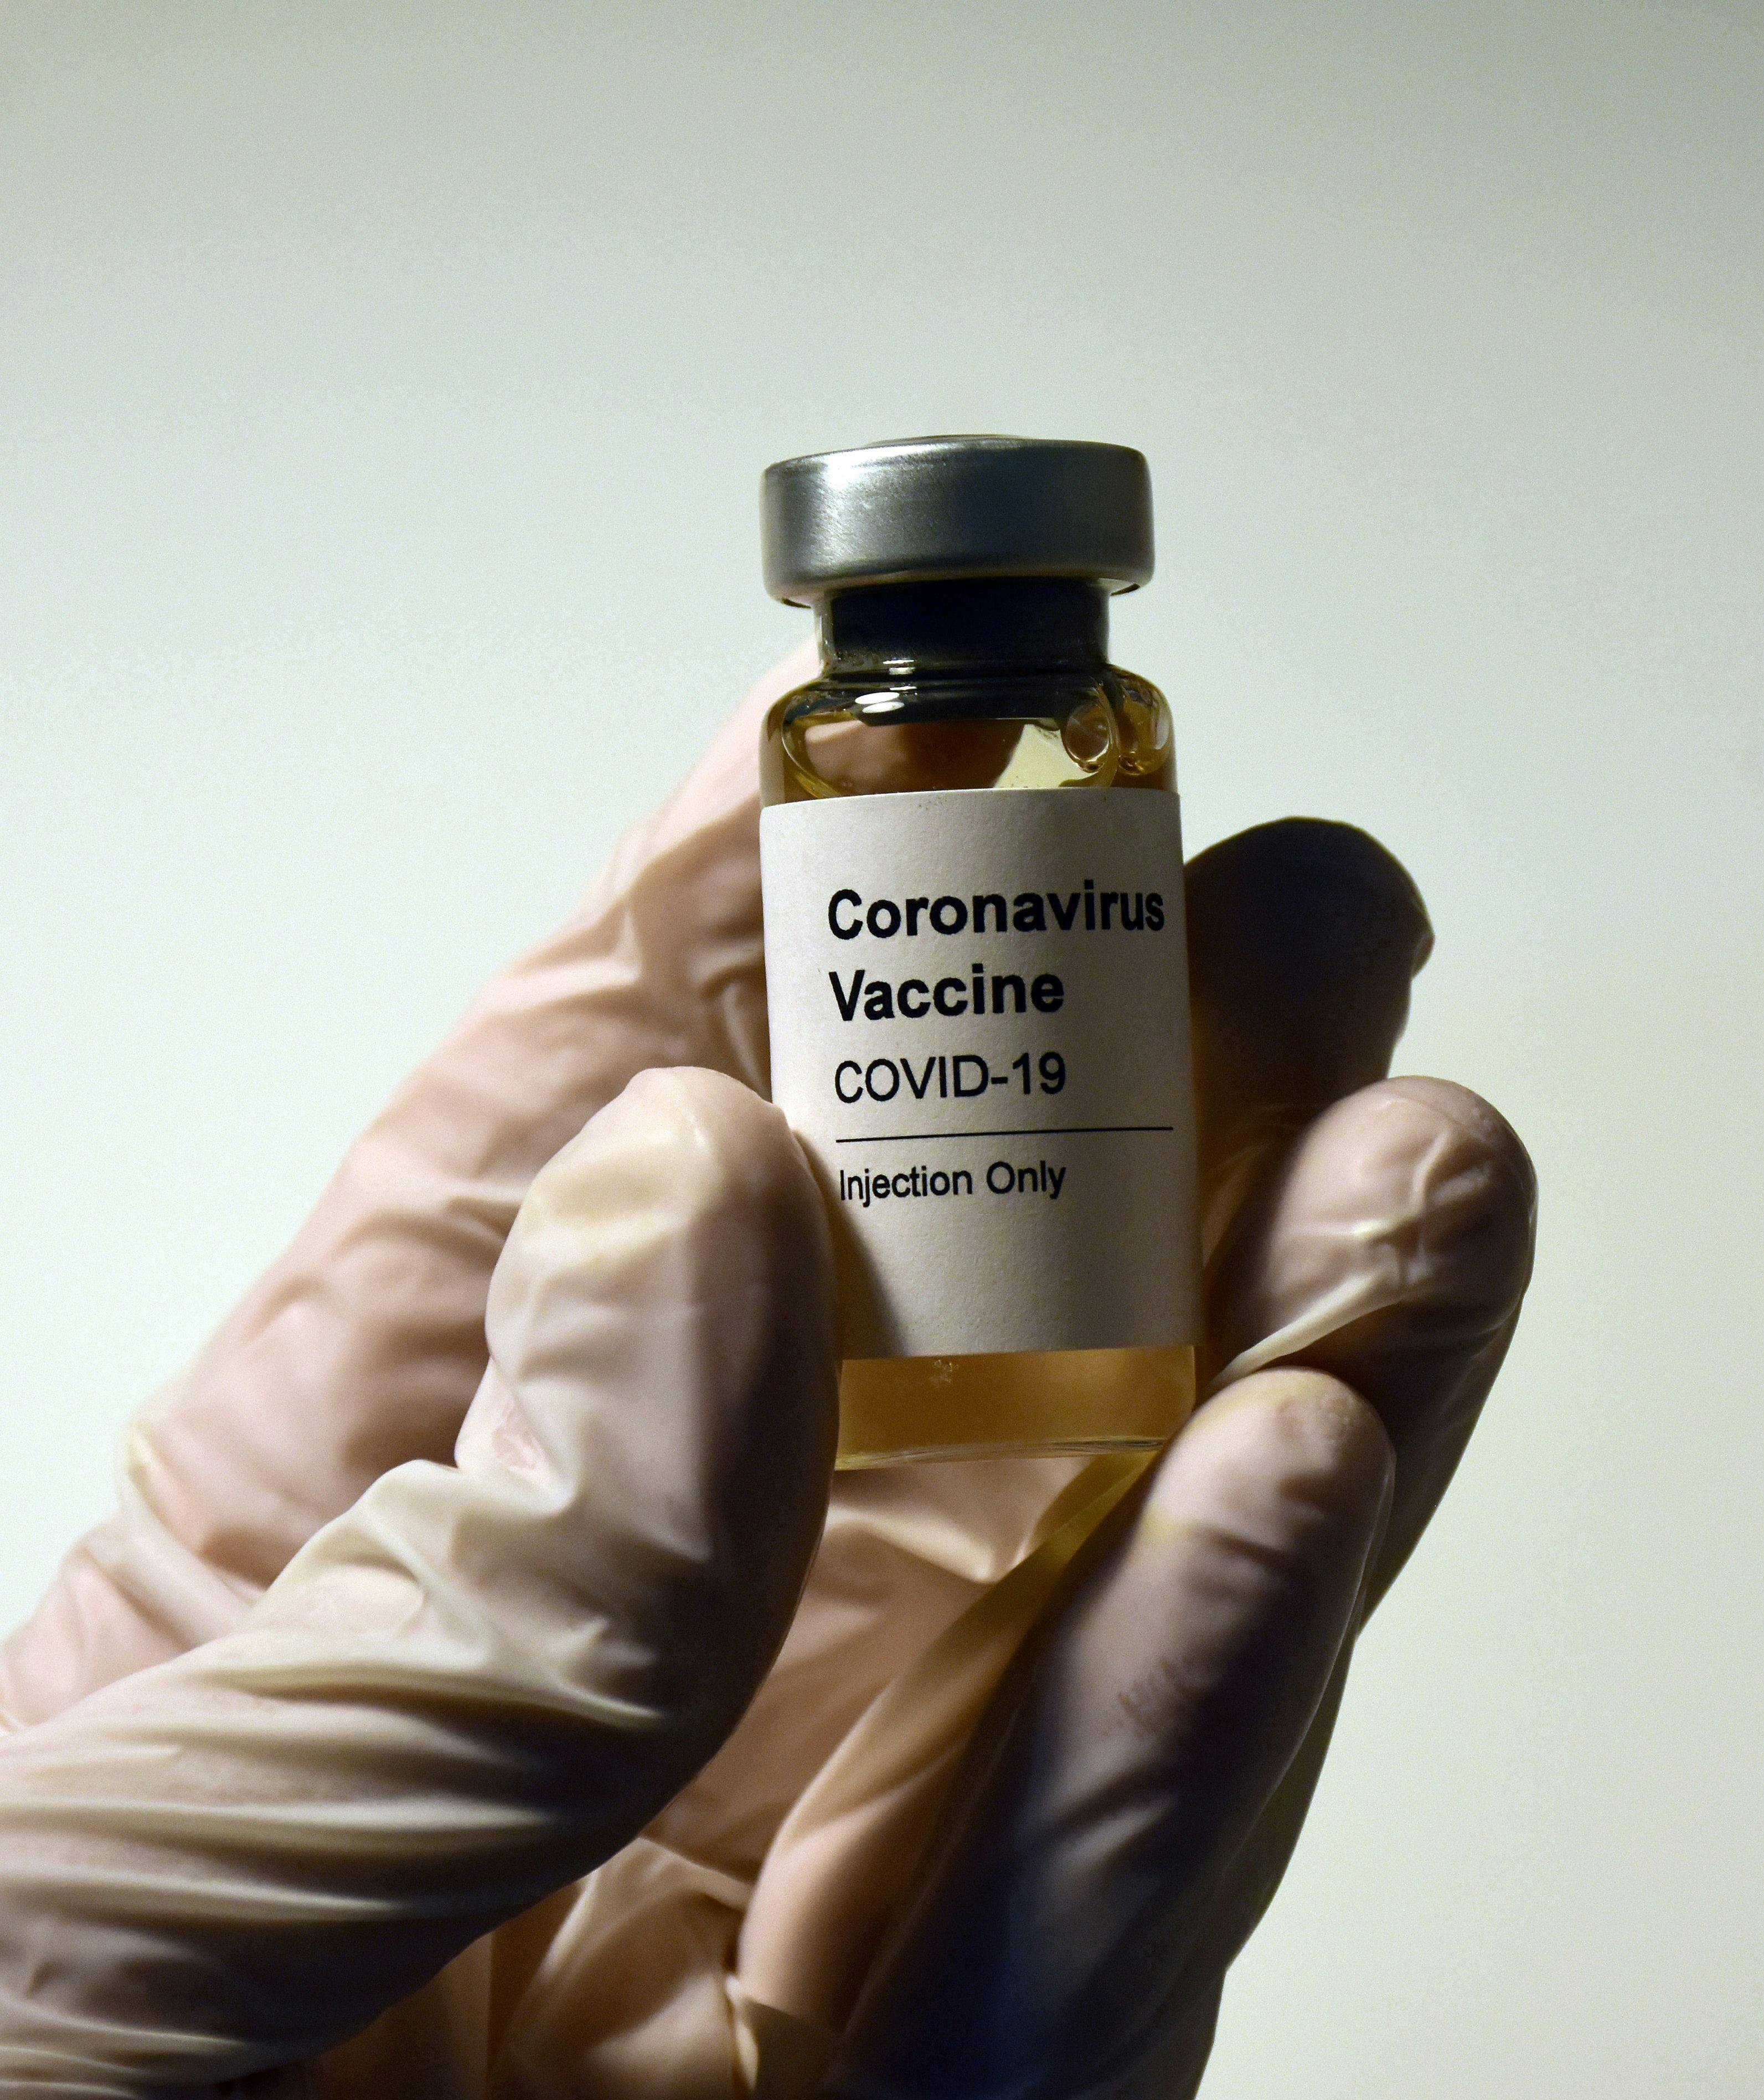 Third Dose of COVID-19 Vaccine May Increase Protection in Immunocompromised Patients